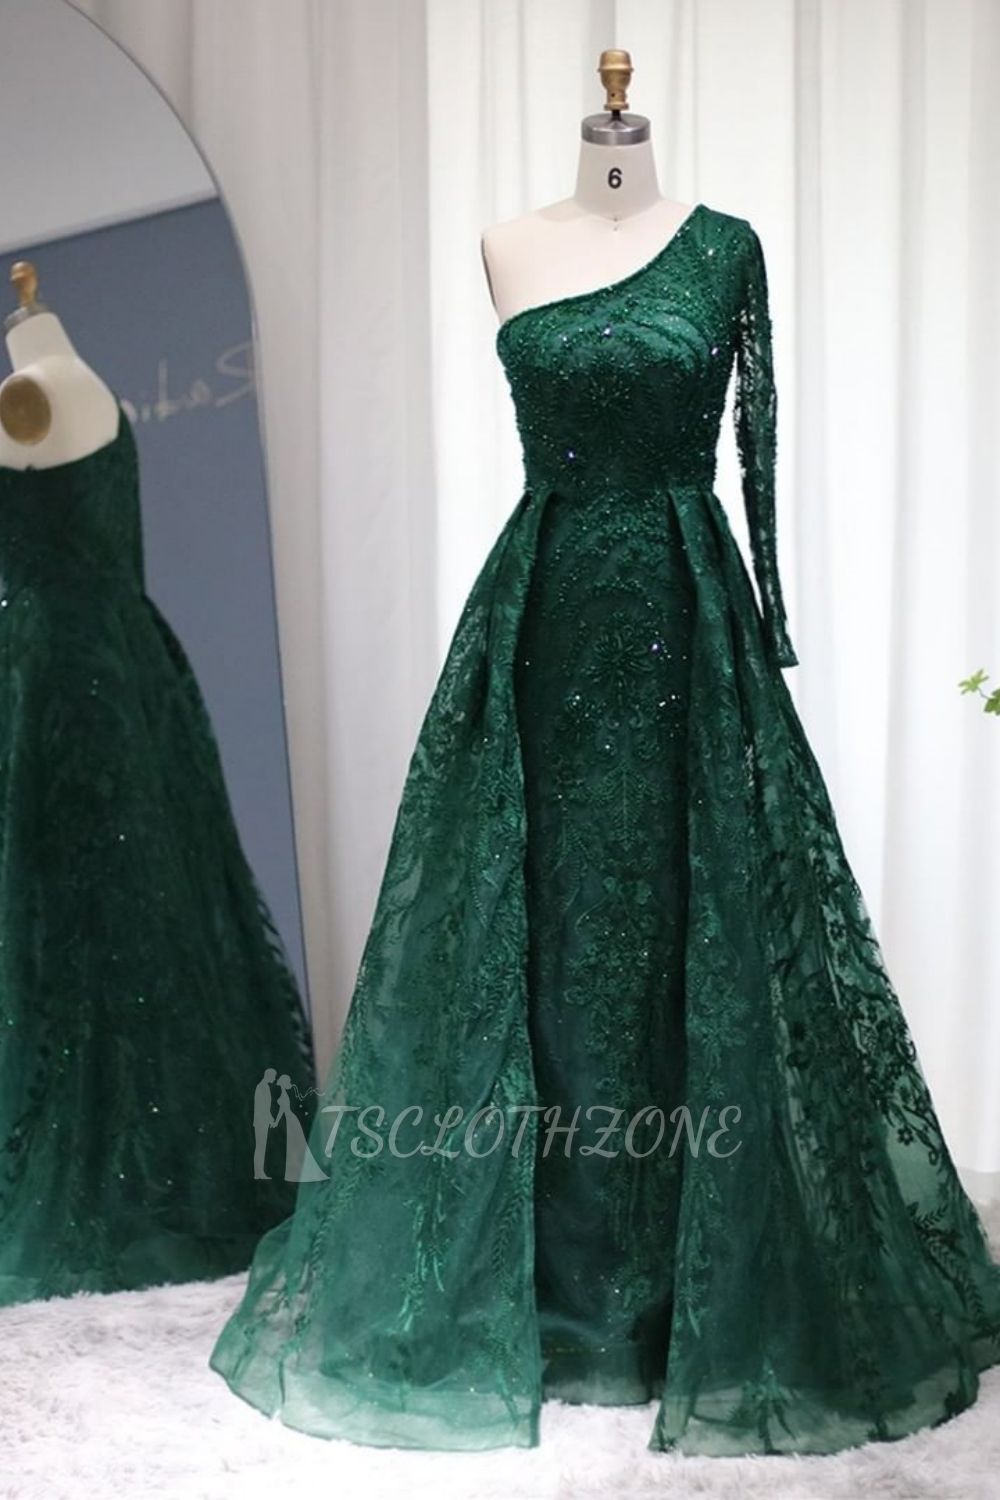 Luxury One Shoulder Beadings Mermaid Evening Gowns Dubai Party Gowns with Detachable Train